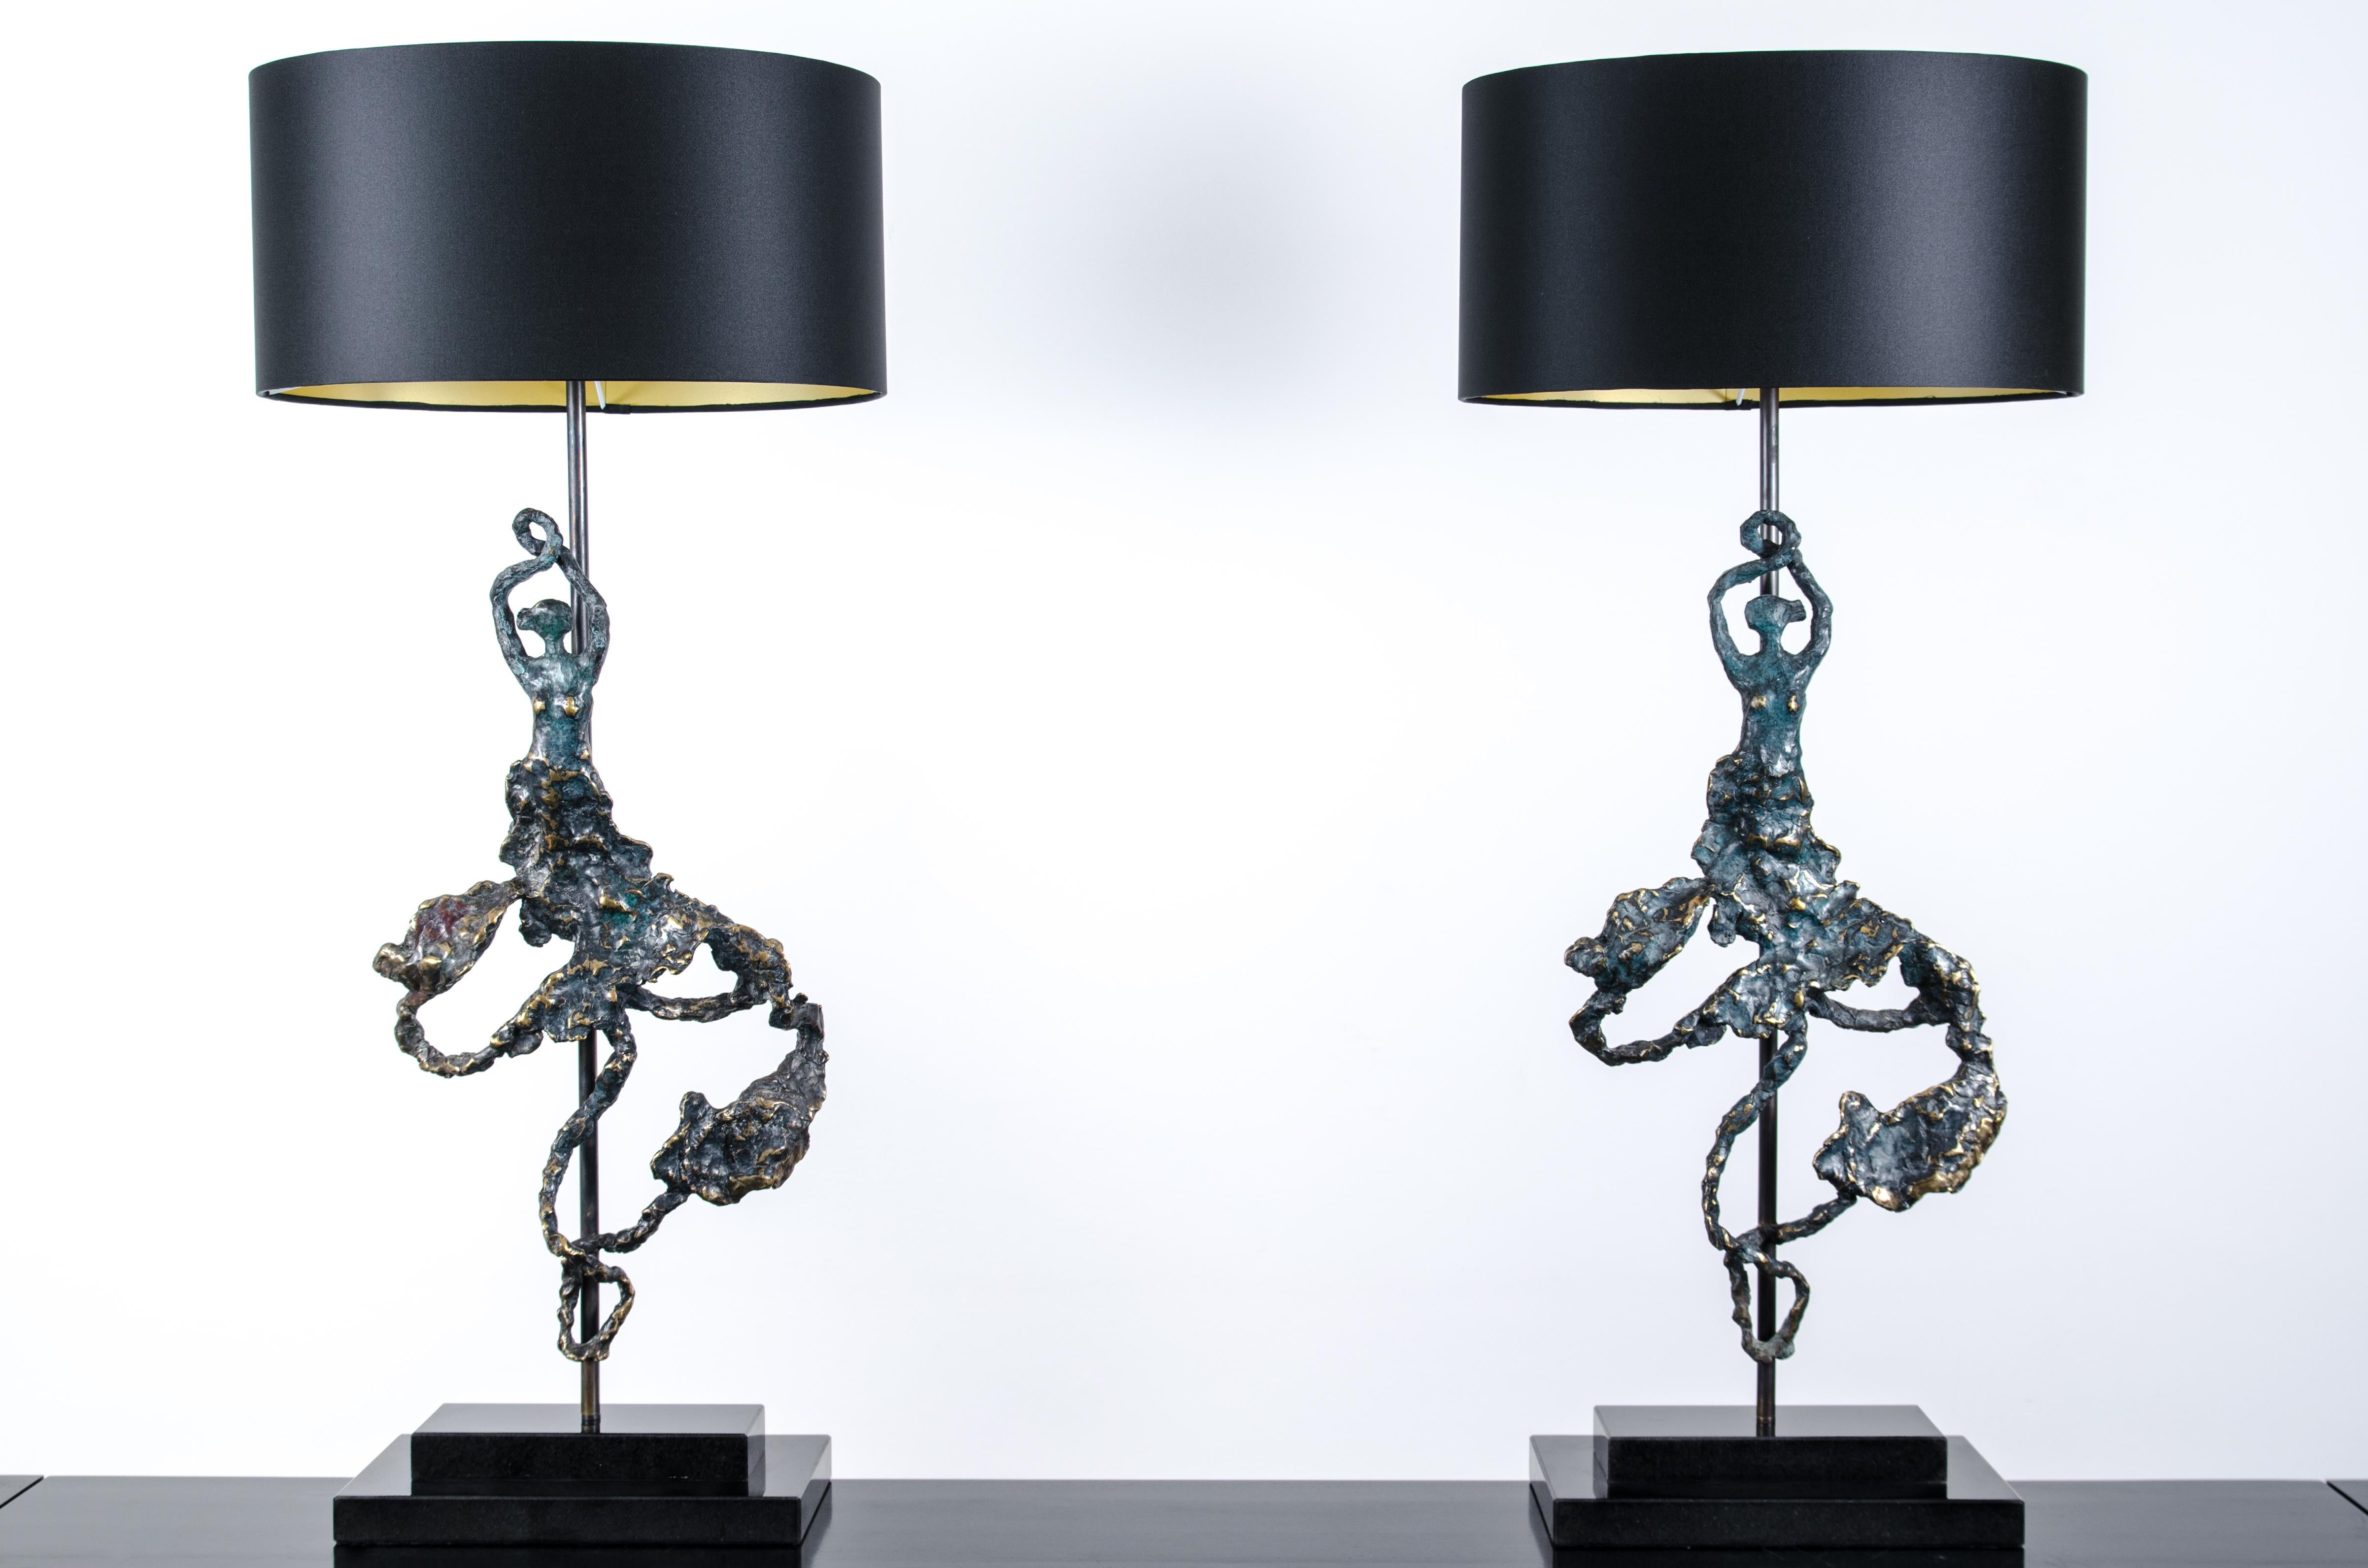 'Andalucia'  stunning duo of sculptural bronze table lamps , meticulously sculpted and handcrafted to embody the essence of Flamenco dance.  Inspired by the artist and designer's Spanish heritage, these lamps capture the graceful movements and